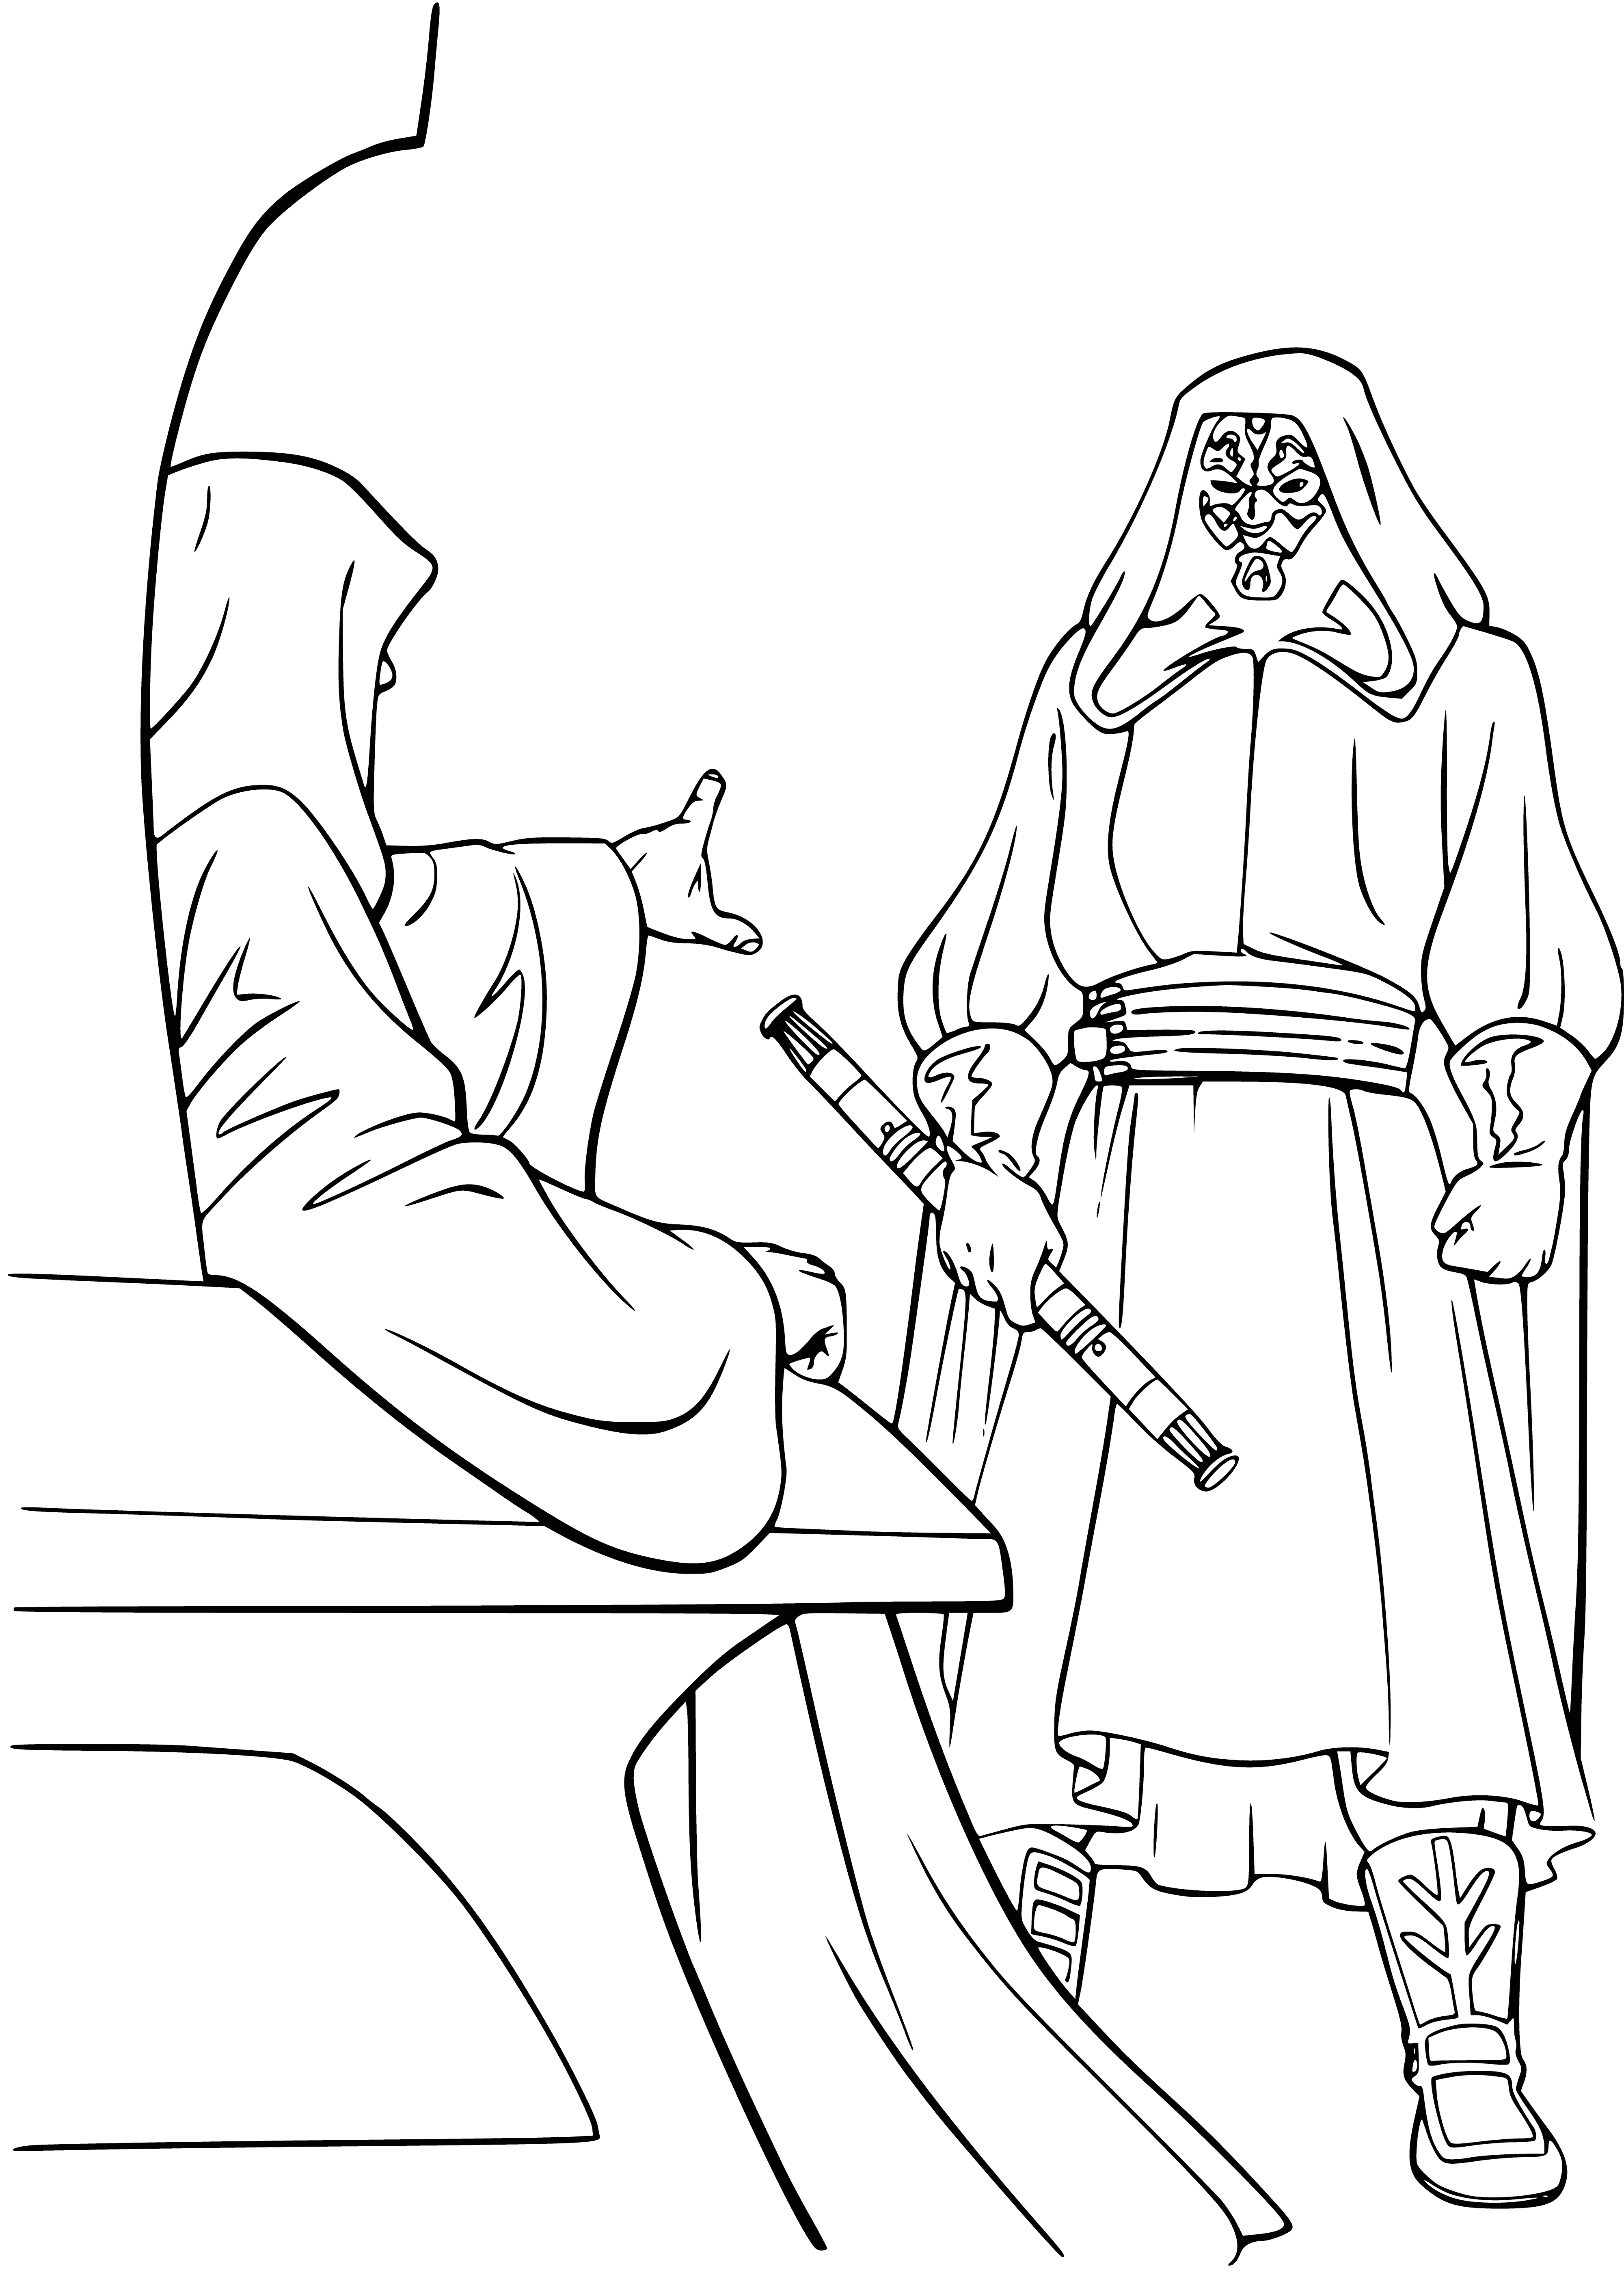 Lord Sidious and his apprentice coloring page